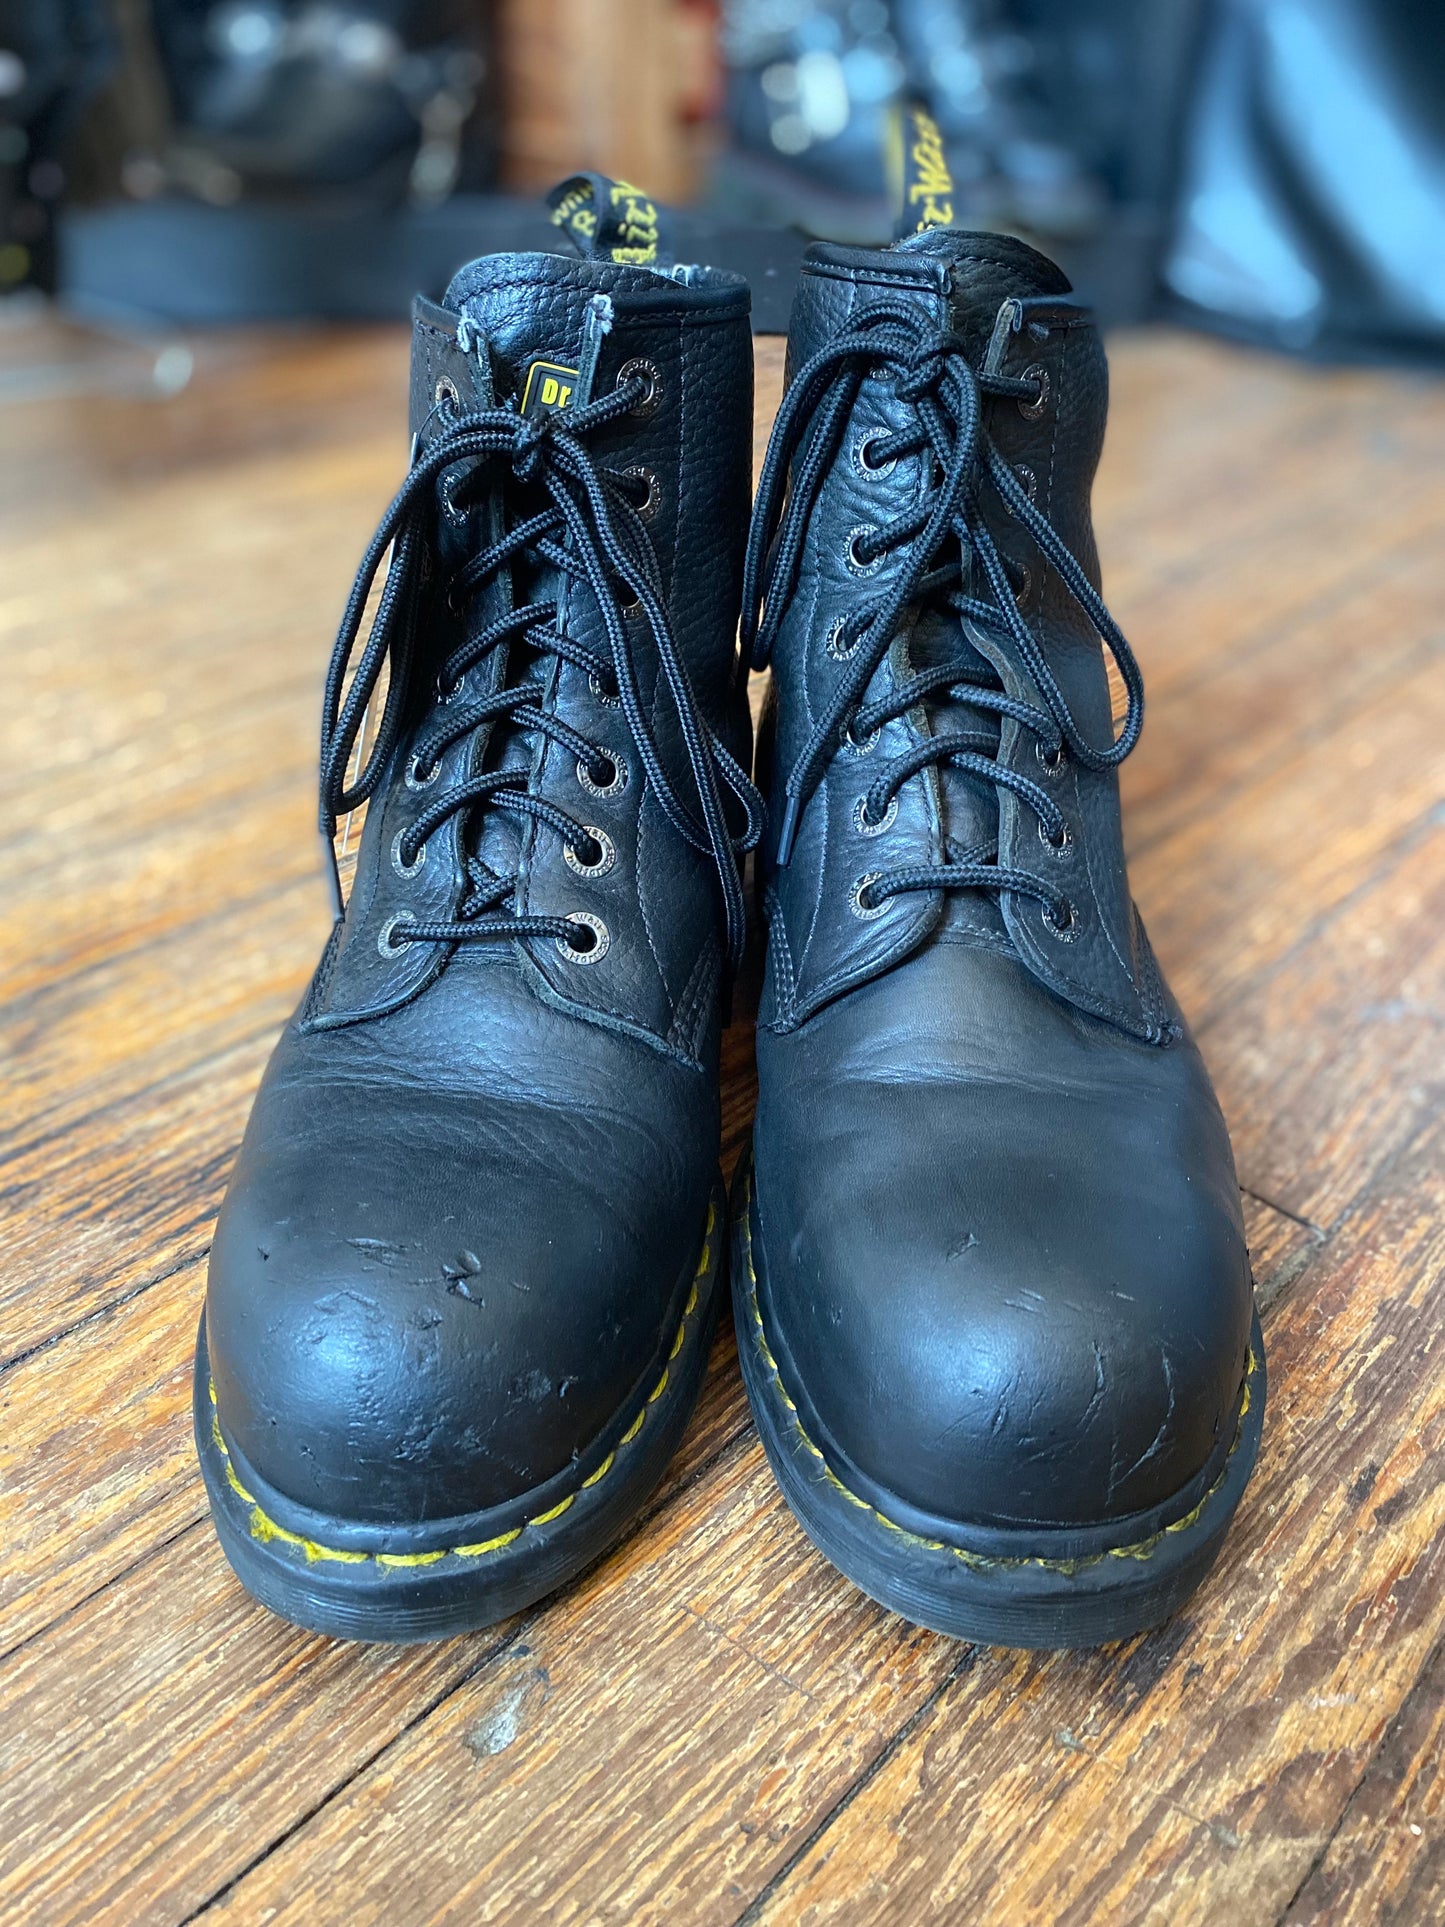 Dr. Martens Icon 7B10 Leather Steel Toe Work Boots